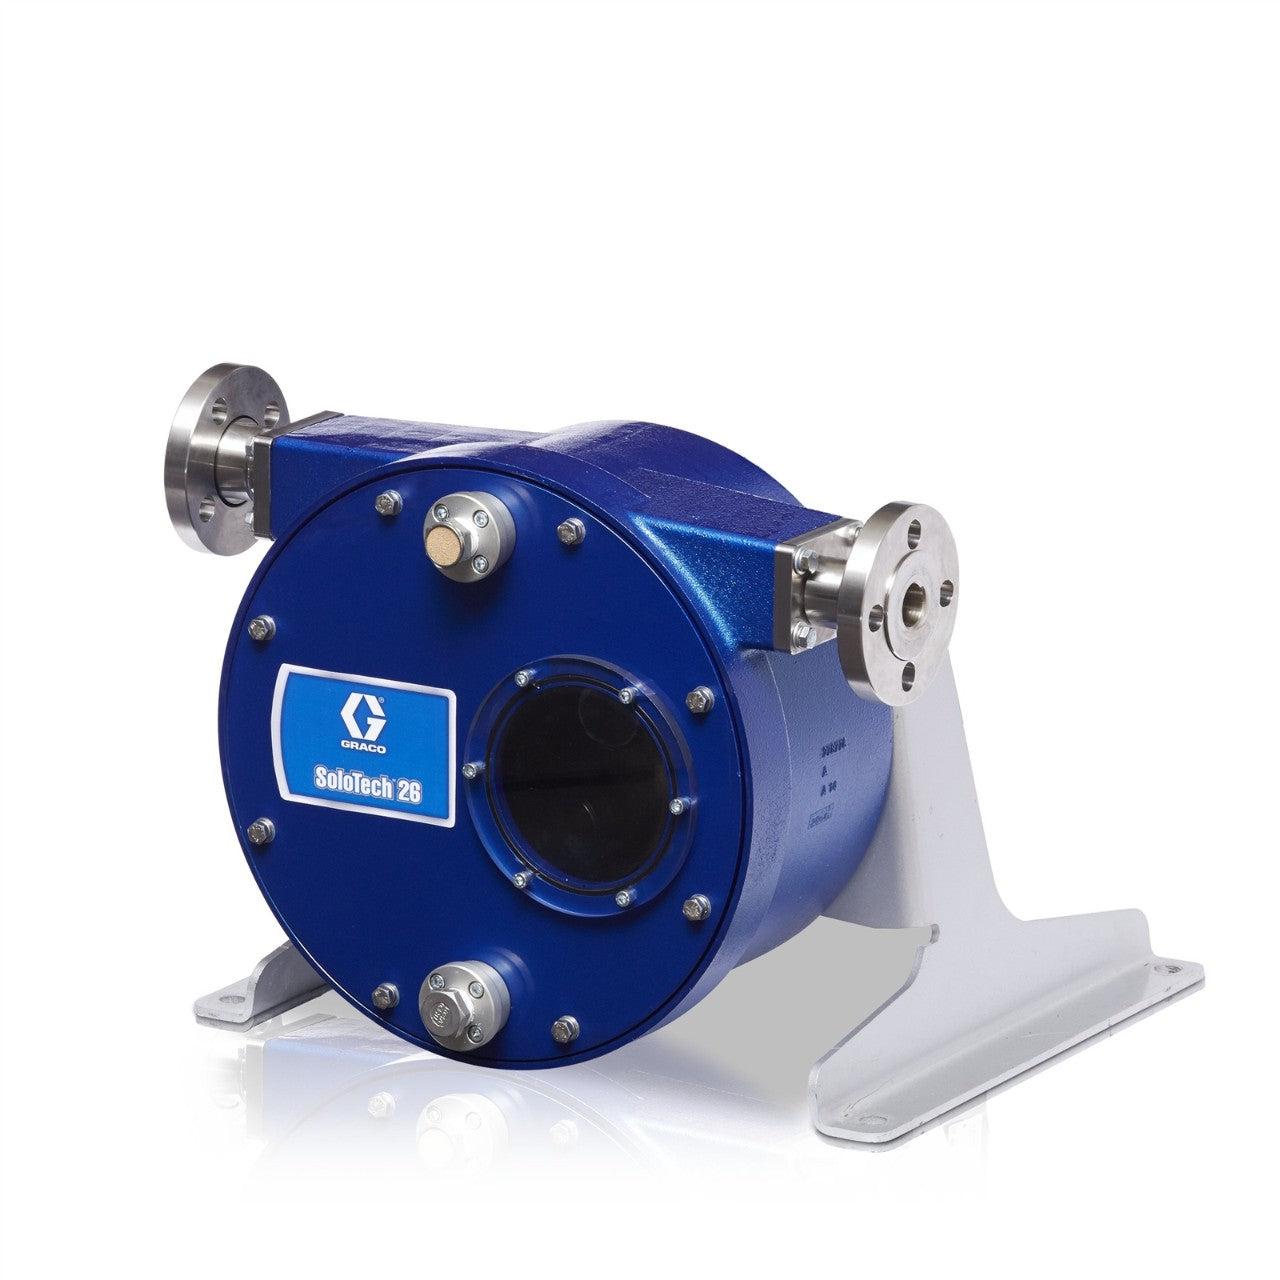 SoloTechª i26 Low Speed Buna-N Peristaltic Hose Pump with Nitrile Hose, 316 Stainless Steel Barb & IEC Connection